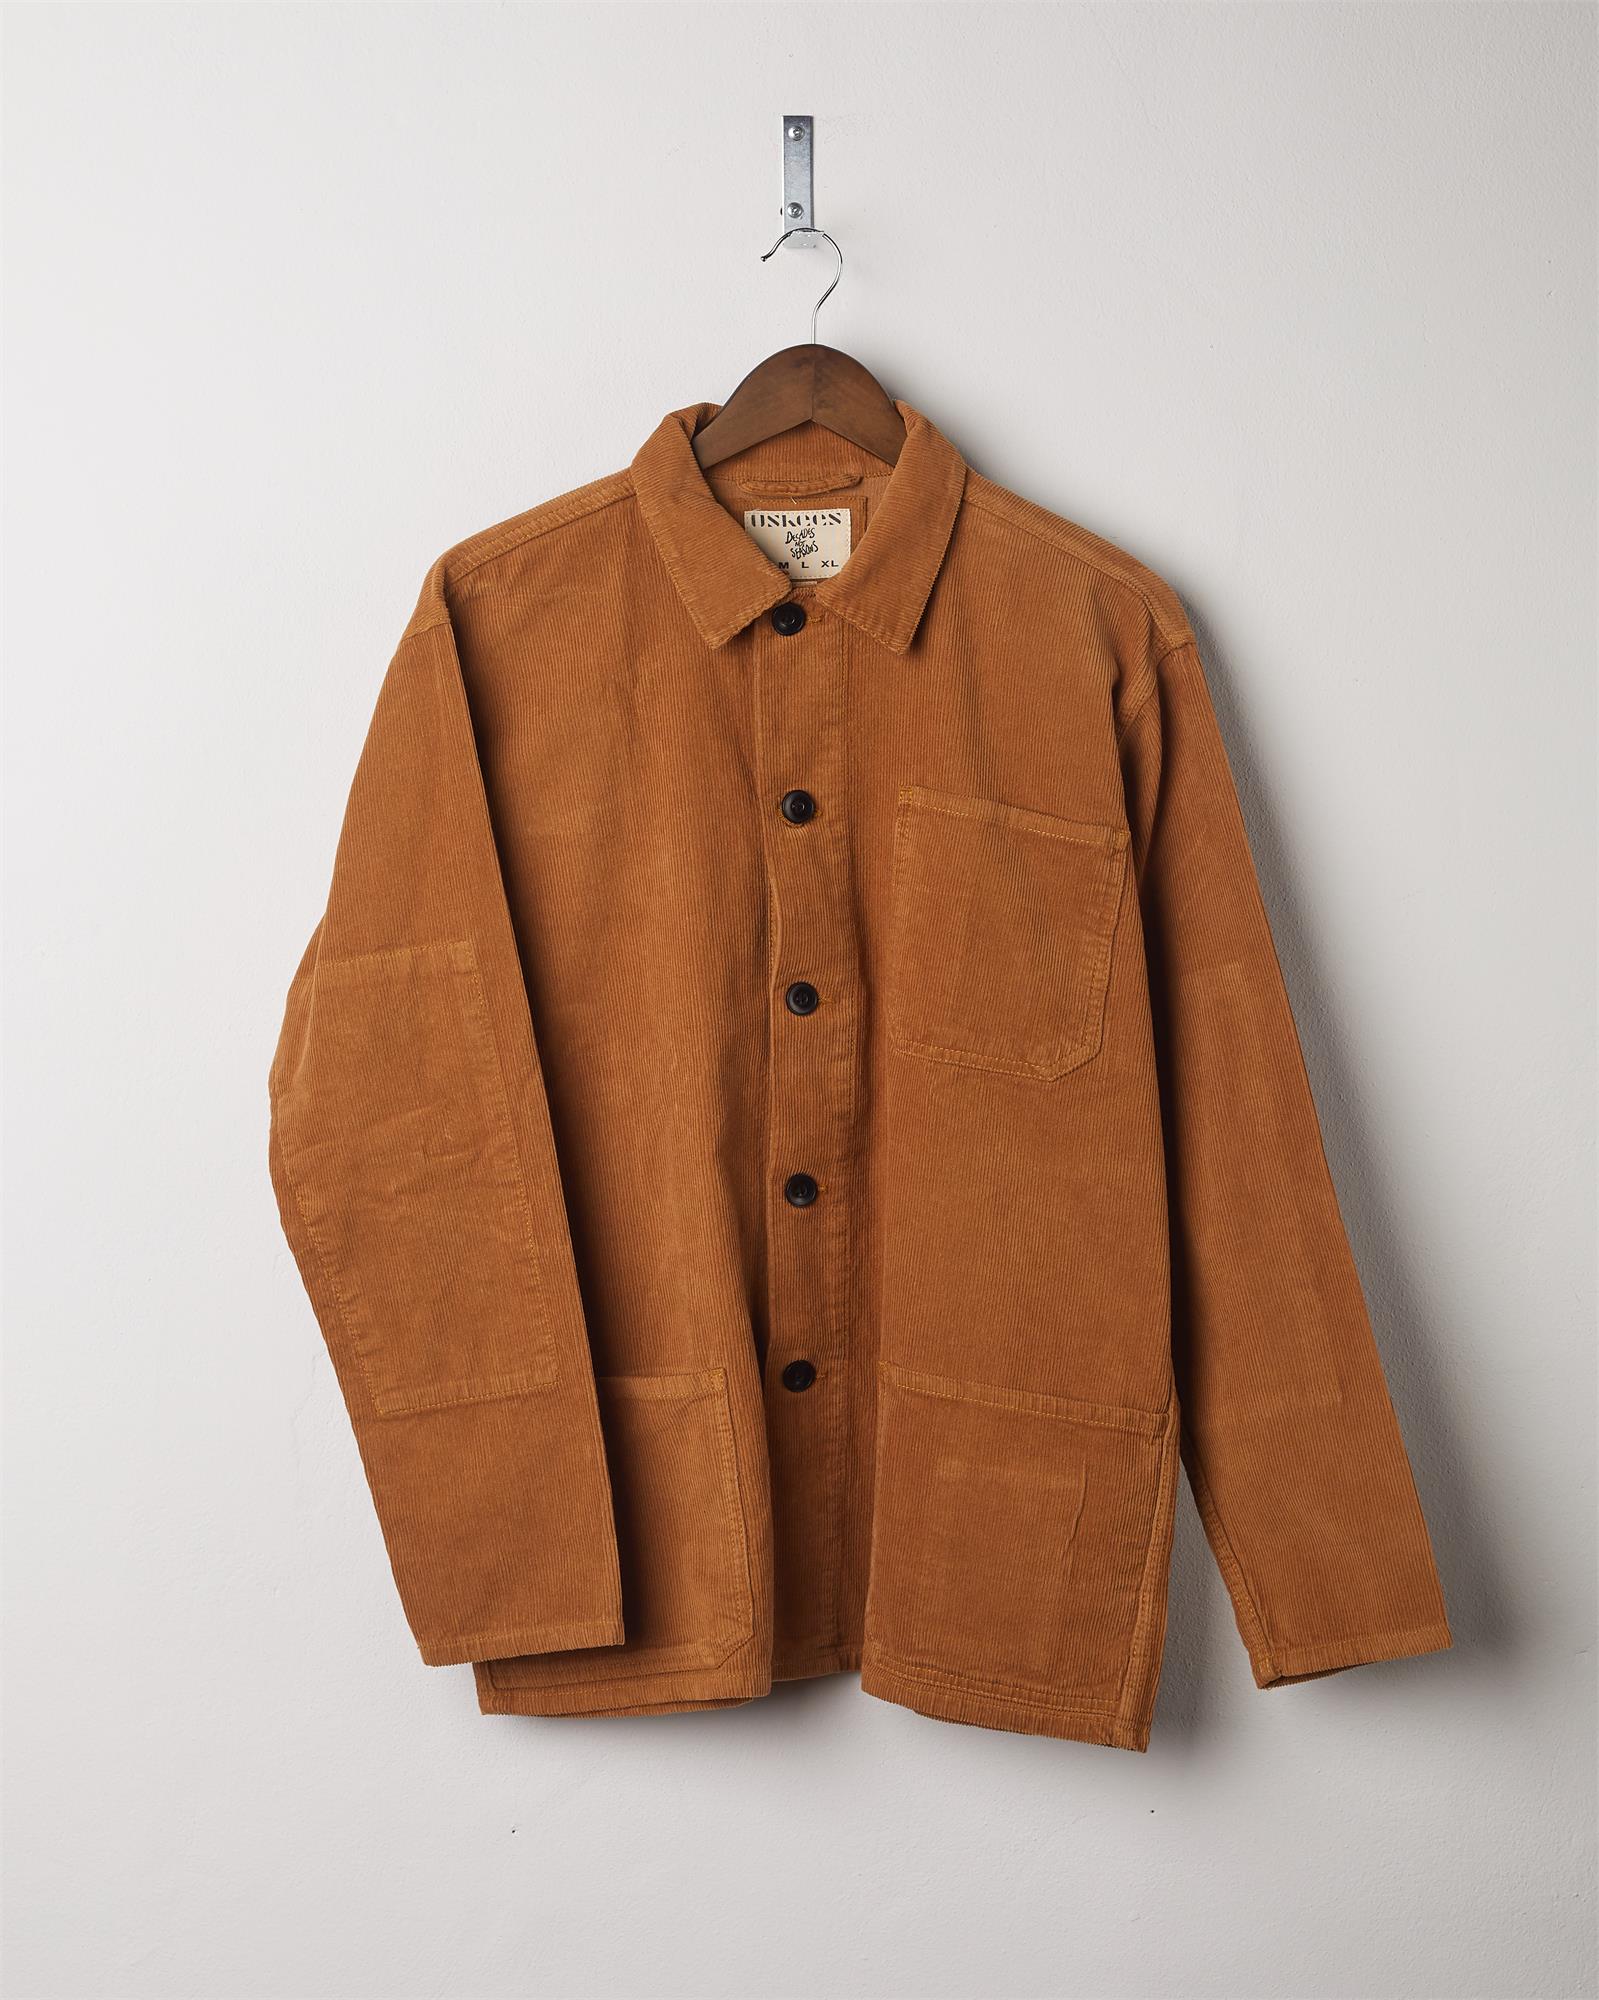 Tan coloured, buttoned corduroy overshirt from Uskees presented on hanger. Clear view of breast and hip pocket and corozo buttons.